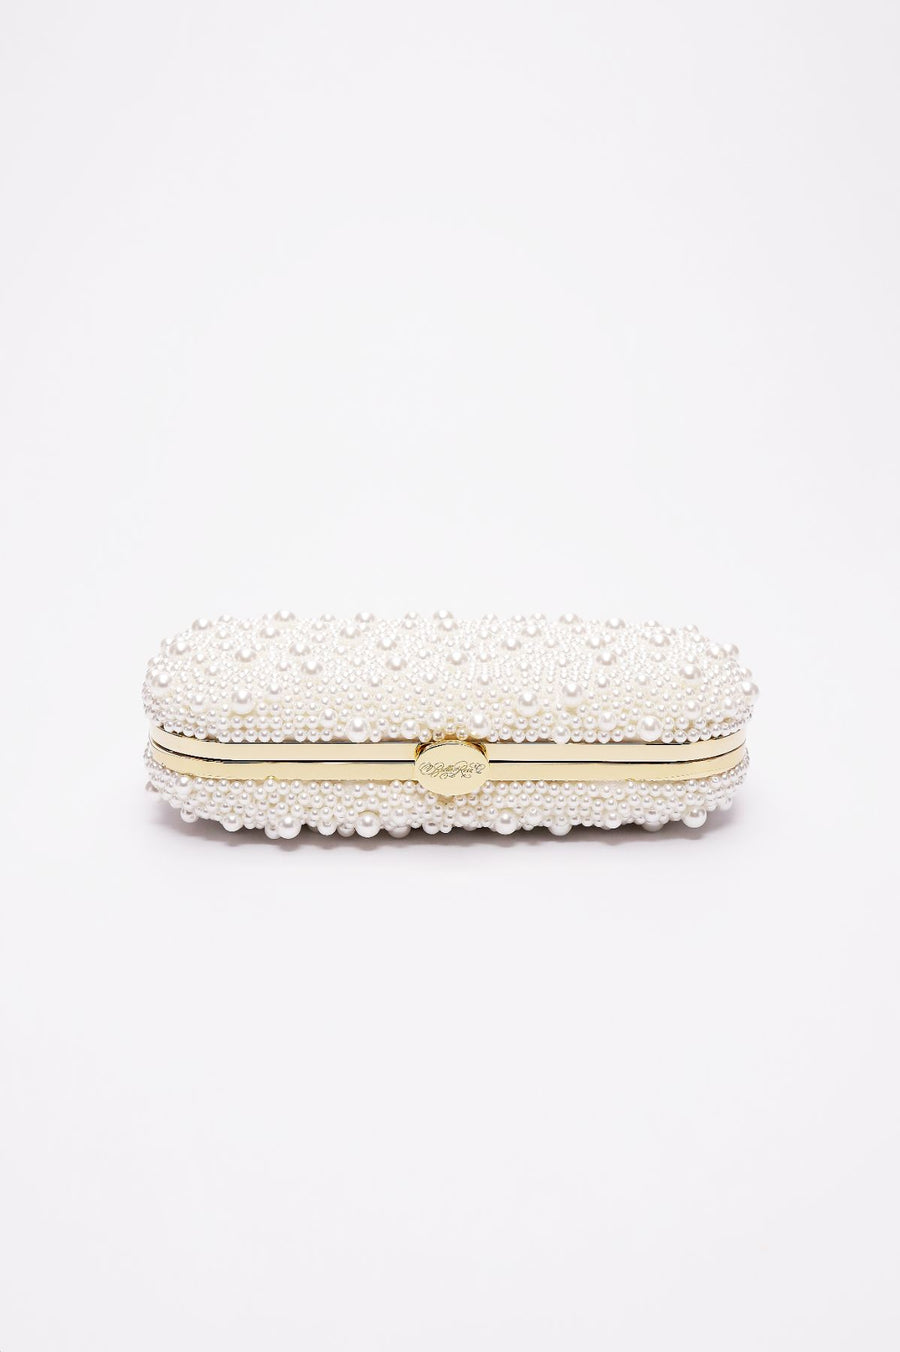 Top closed view of True Love Pearl Bella Clutch satin with gold hardware frame.